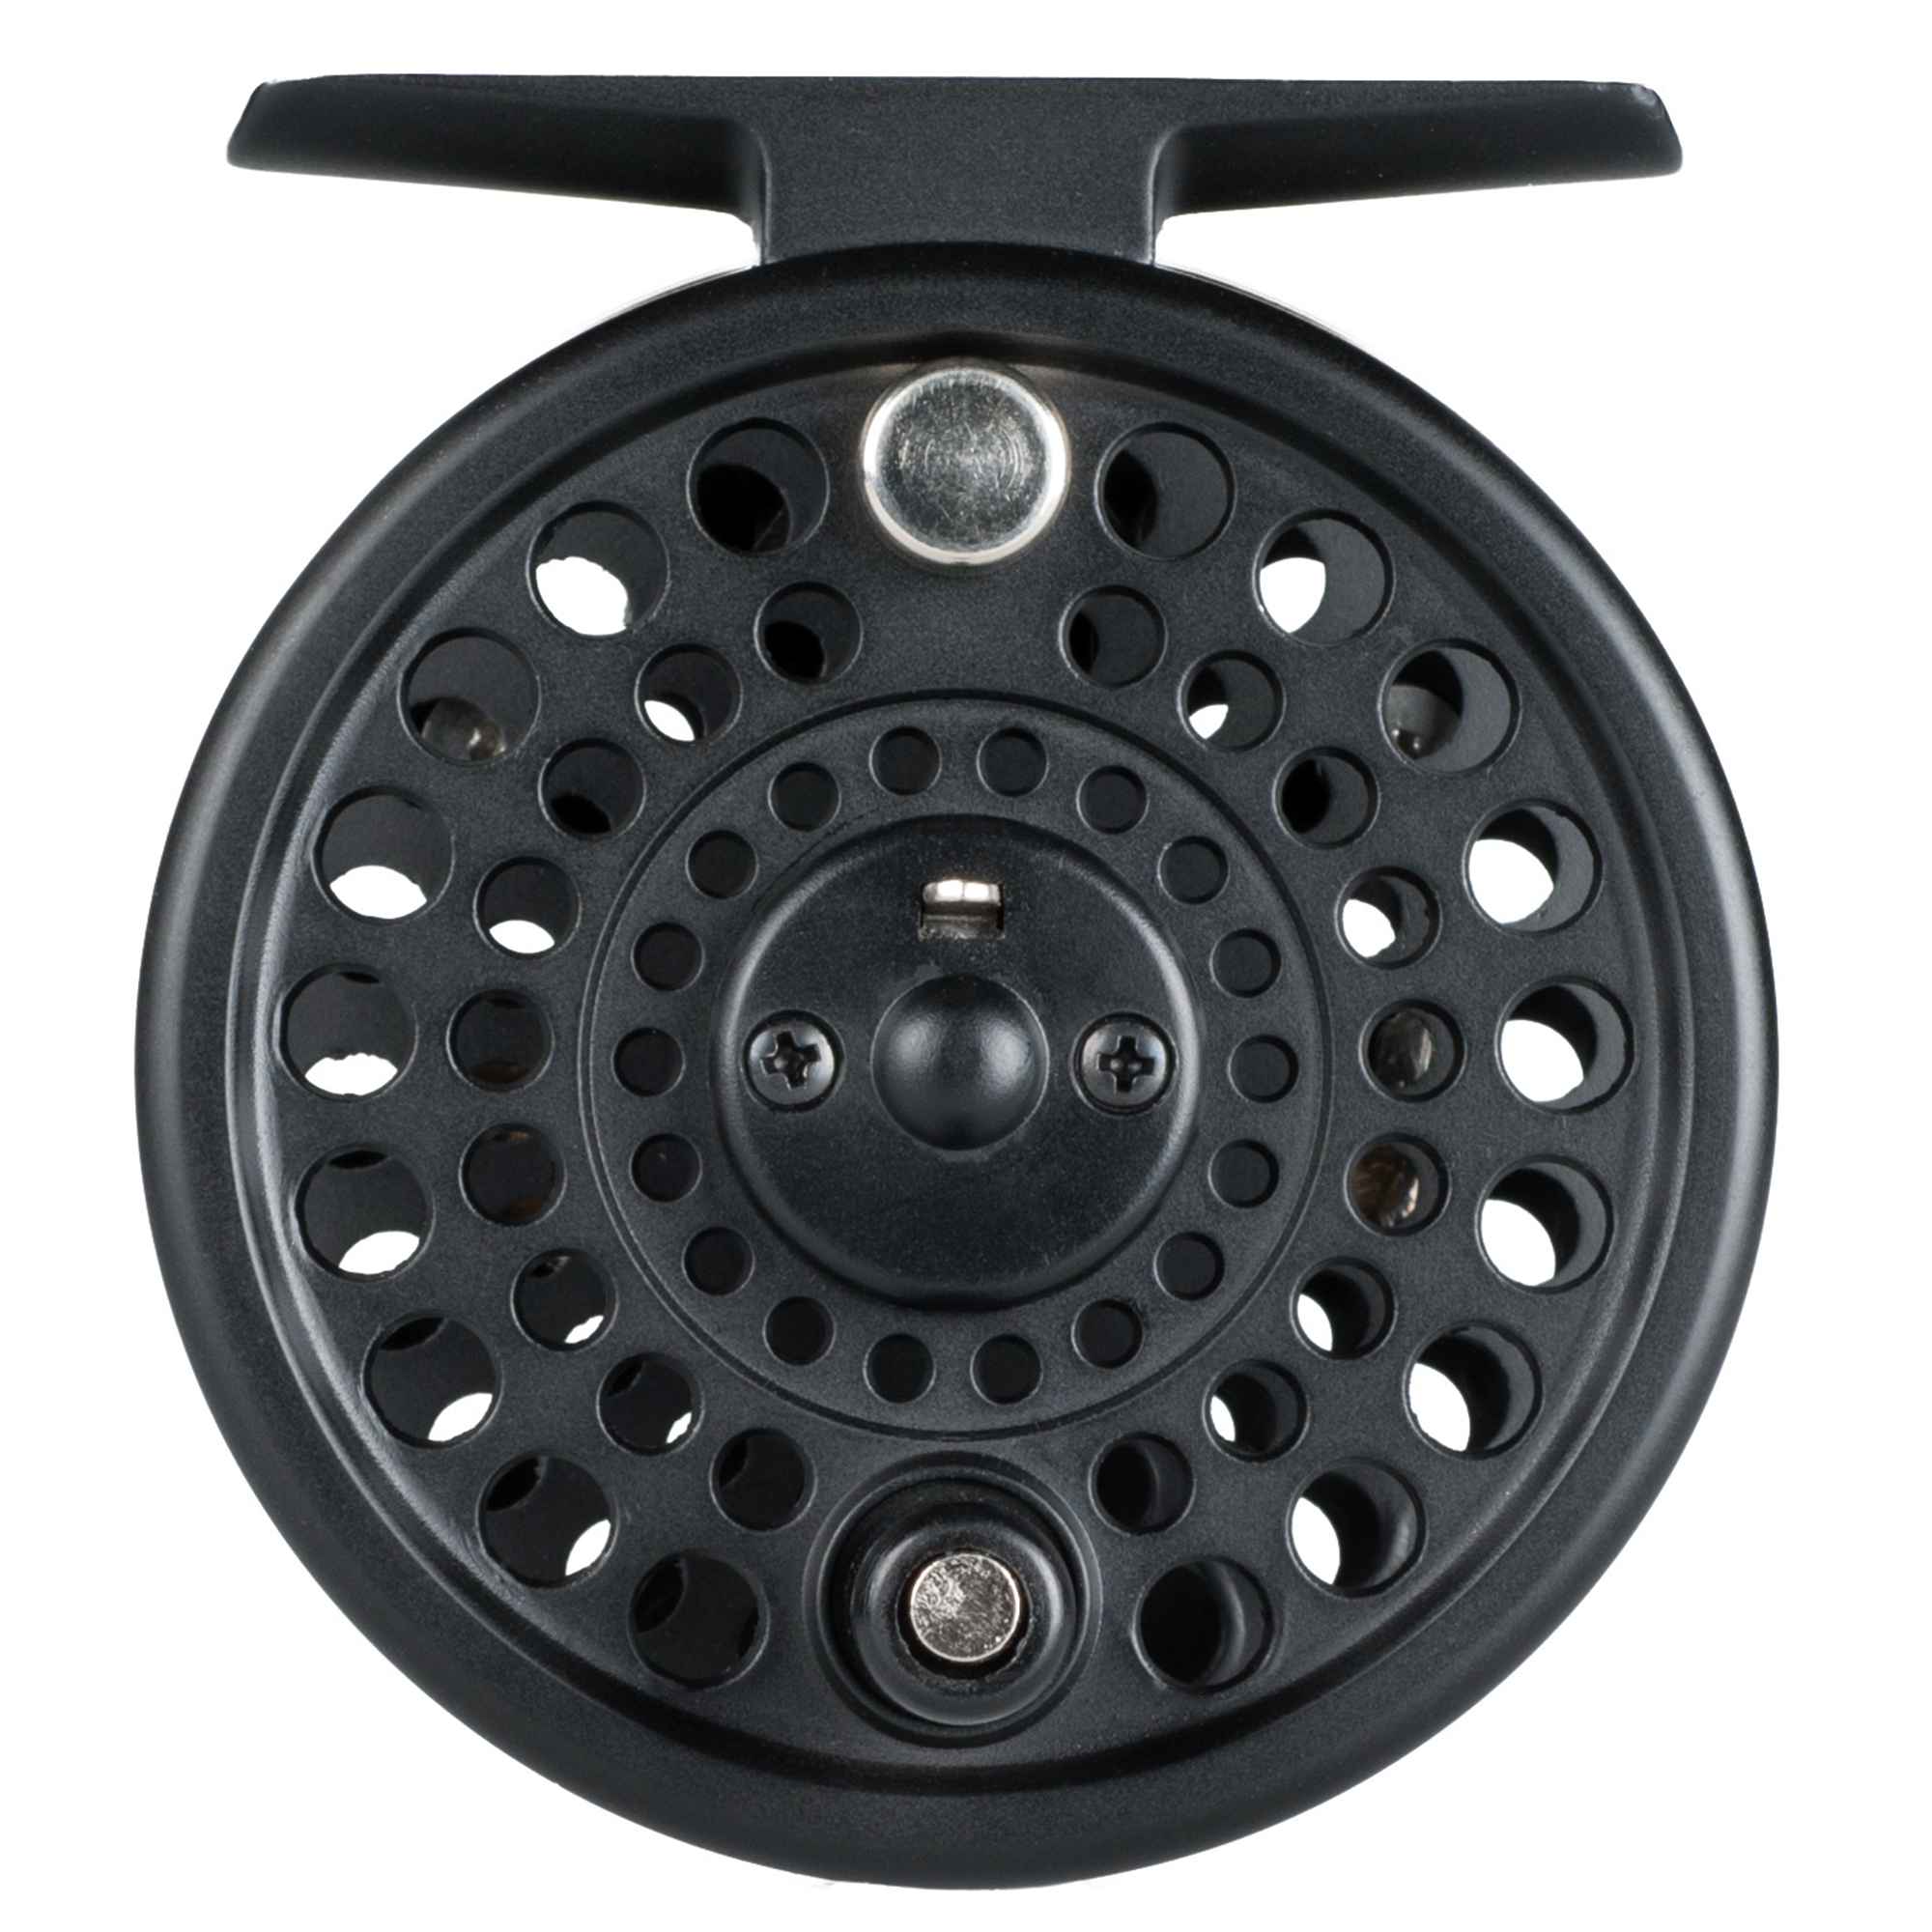 Pflueger MON56X Monarch 5/6wt 1.1:1 1370772 , 17% Off with Free